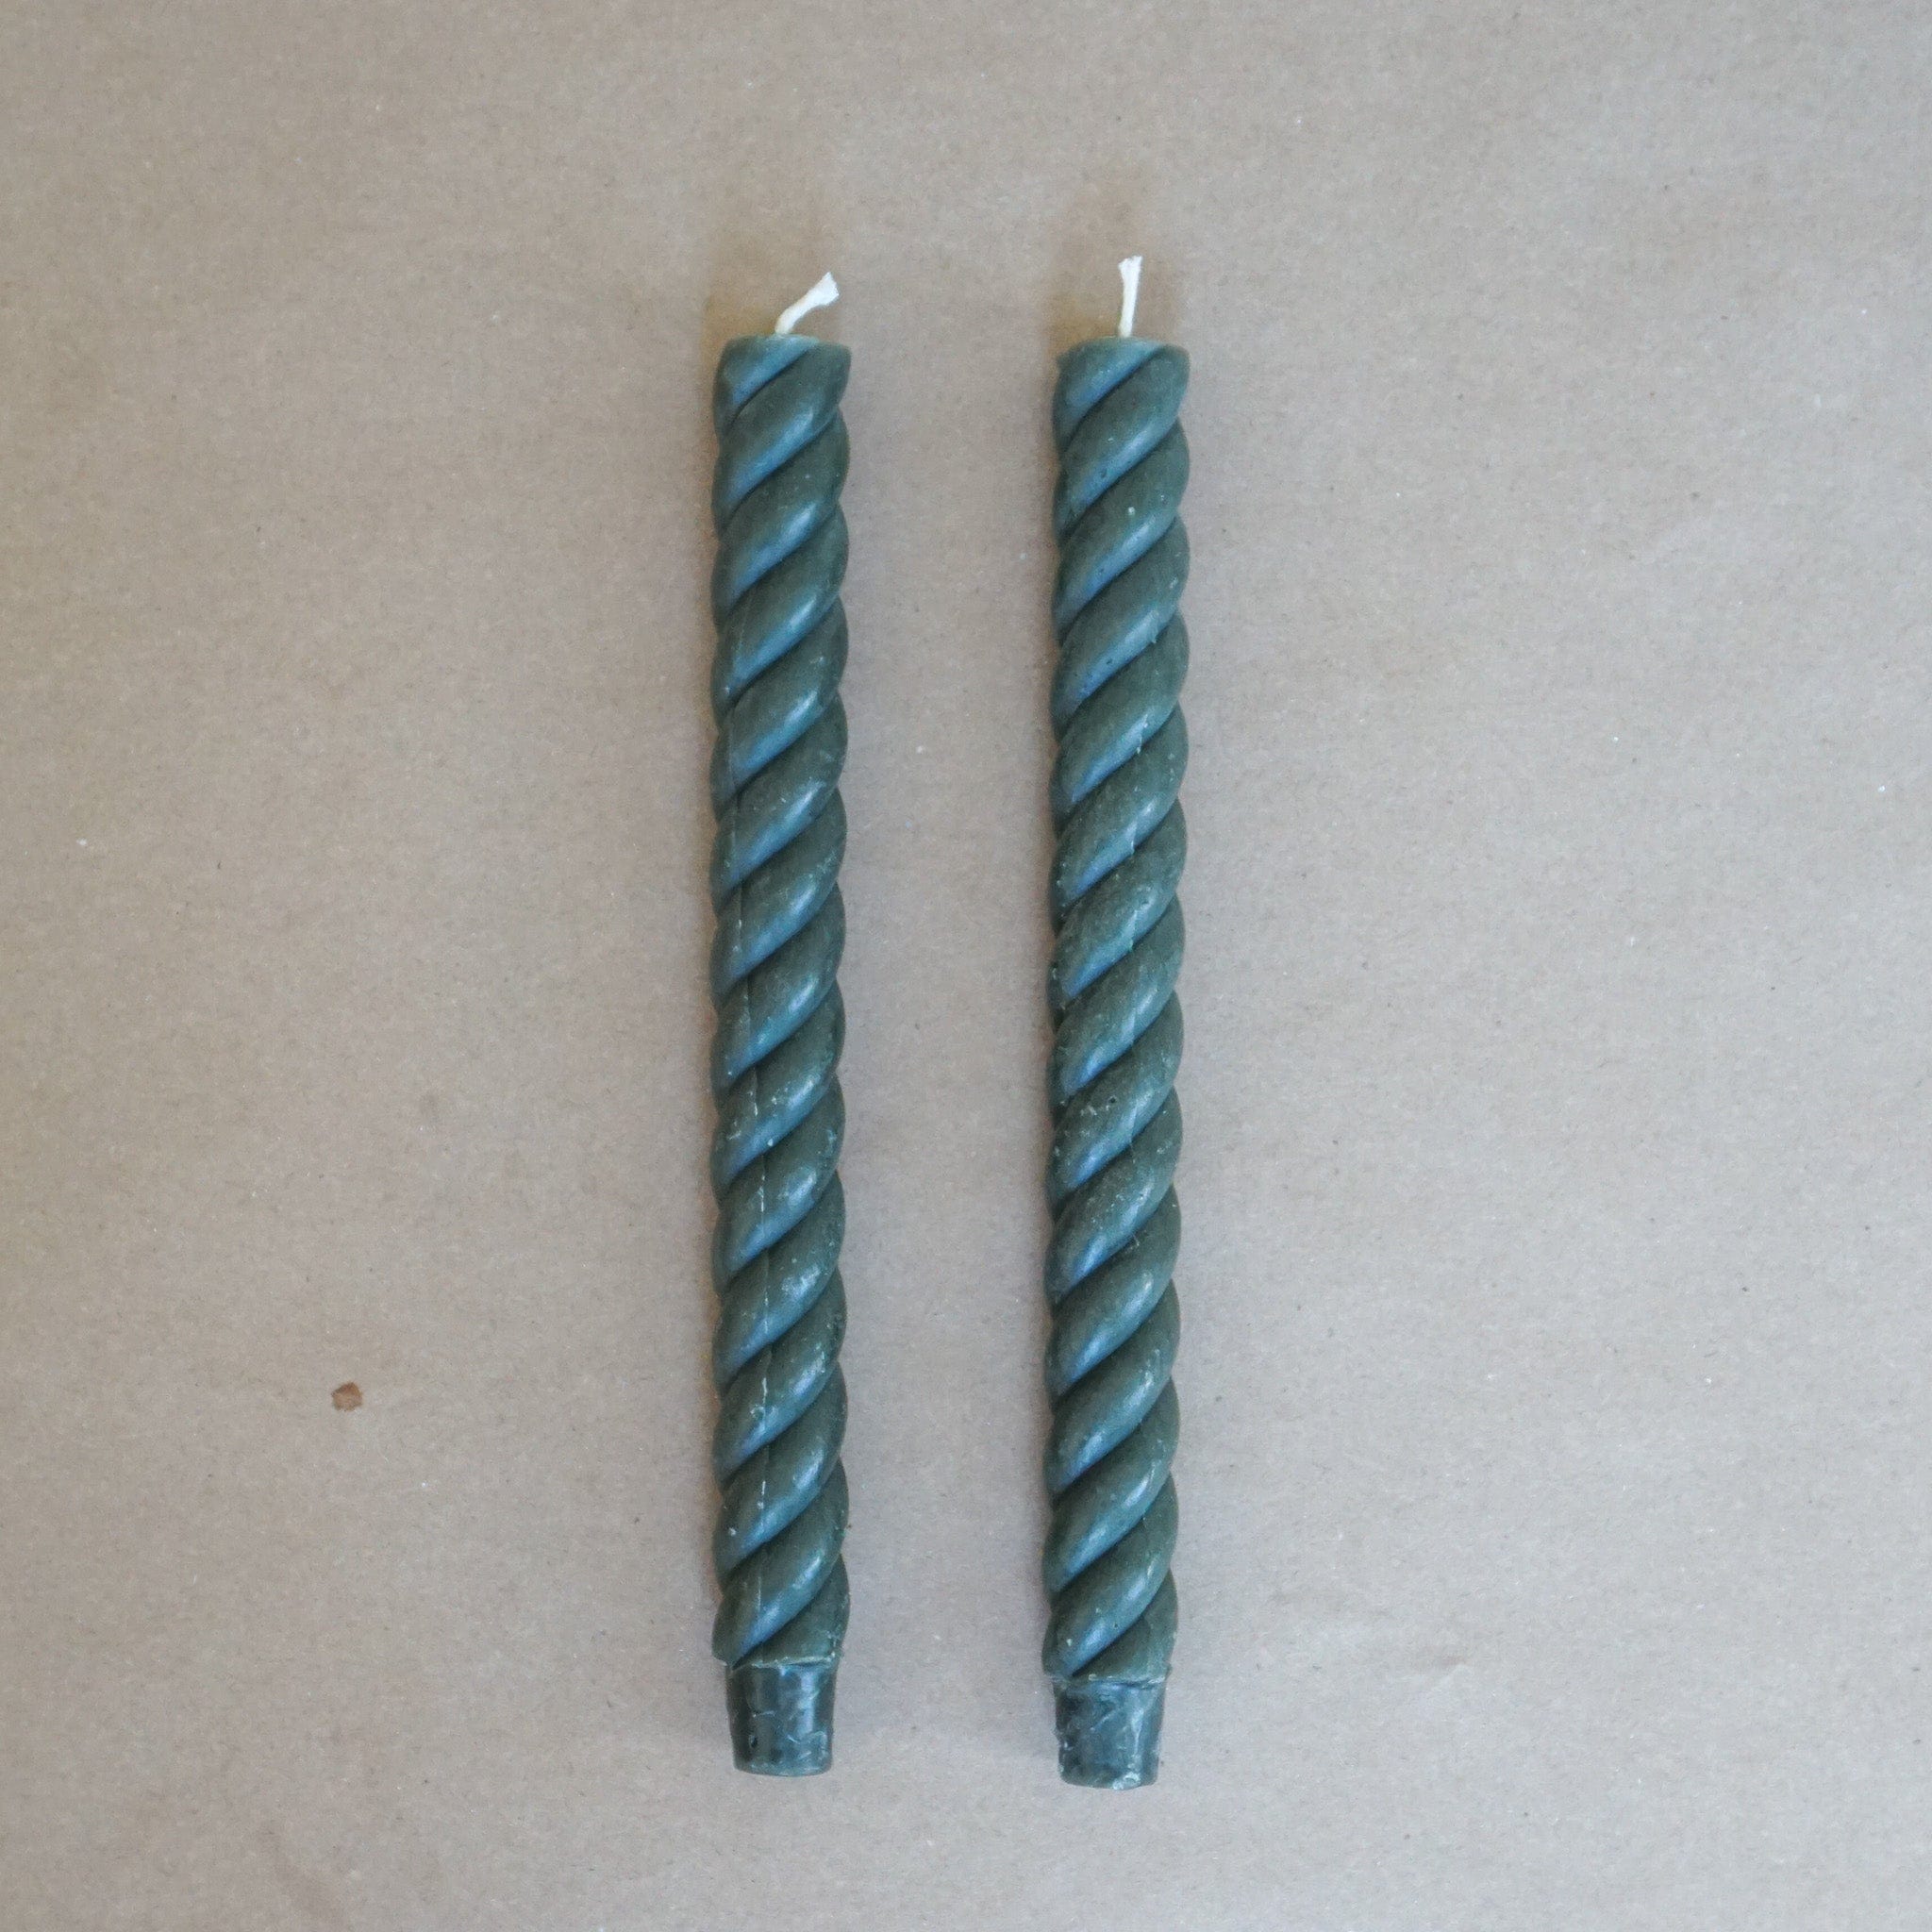 GREENTREE CANDLES Decor Antique Rope Taper Candles by Greentree